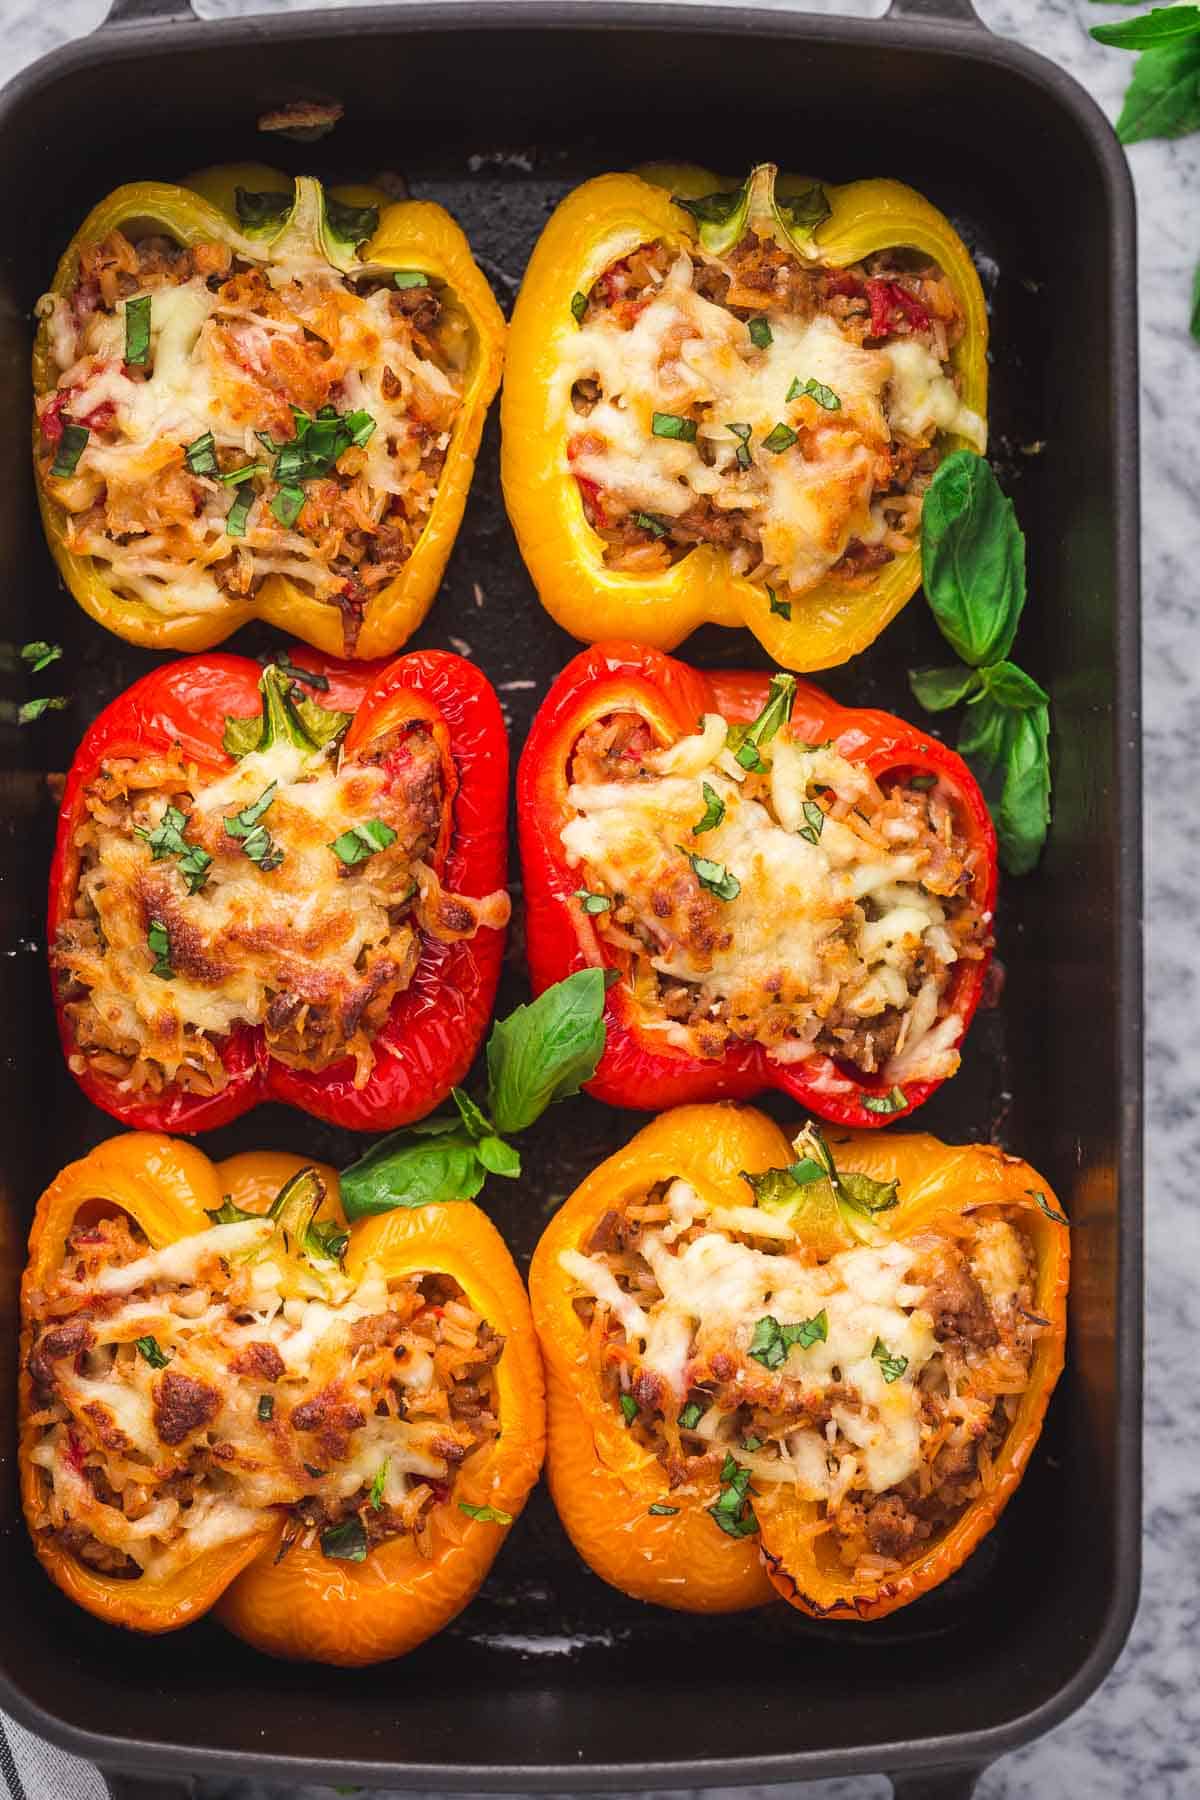 6 halves bell peppers stuffed with rice, turkey, and cheese